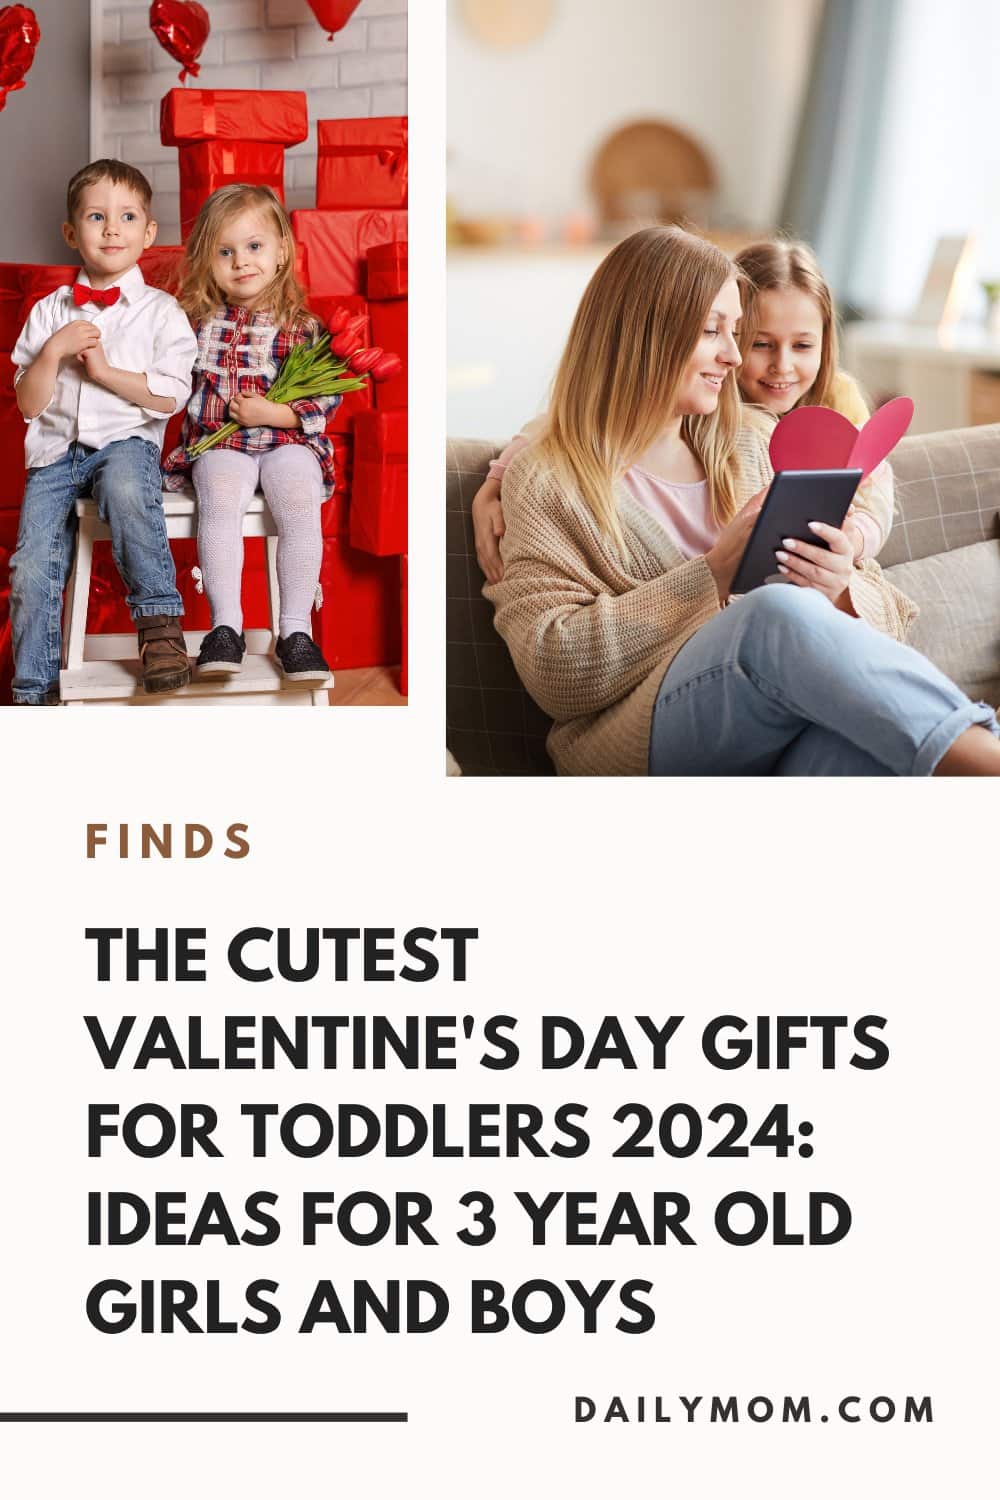 The Cutest Valentine'S Day Gifts For Toddlers 2024: Ideas For 3 Year Old Girls And Boys 63 Daily Mom, Magazine For Families